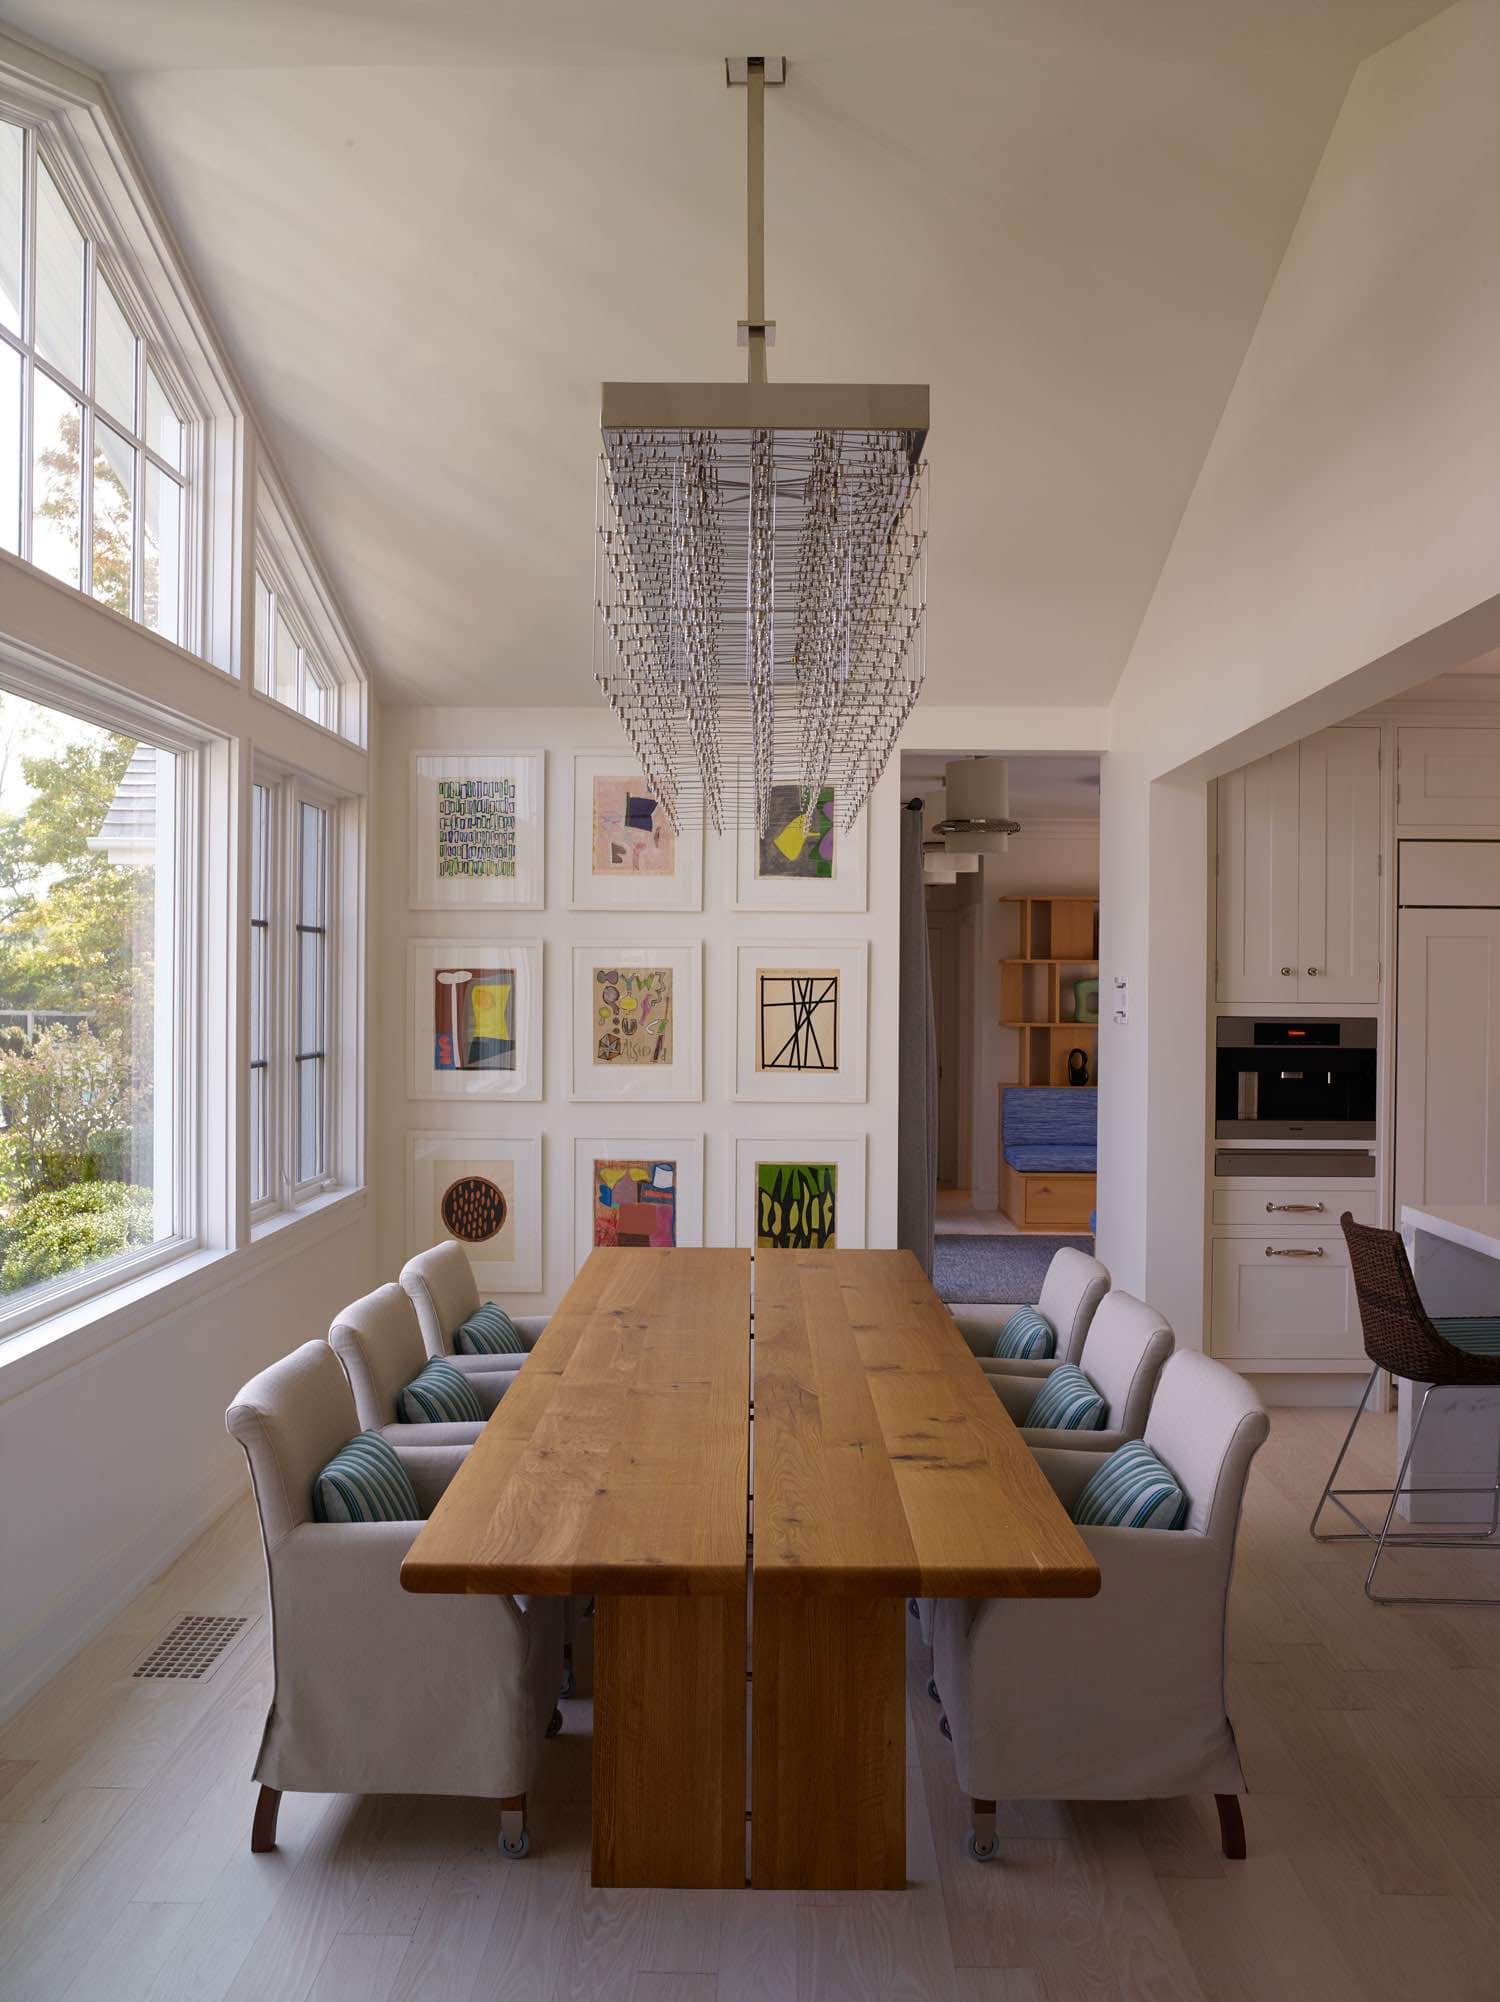 Designed by Carol Egan, this image shows the breakfast room table and chairs with Artwork by Jorge Fick.  The Oak dining table is flanked by linen slipcovered Piet boon dining chairs.